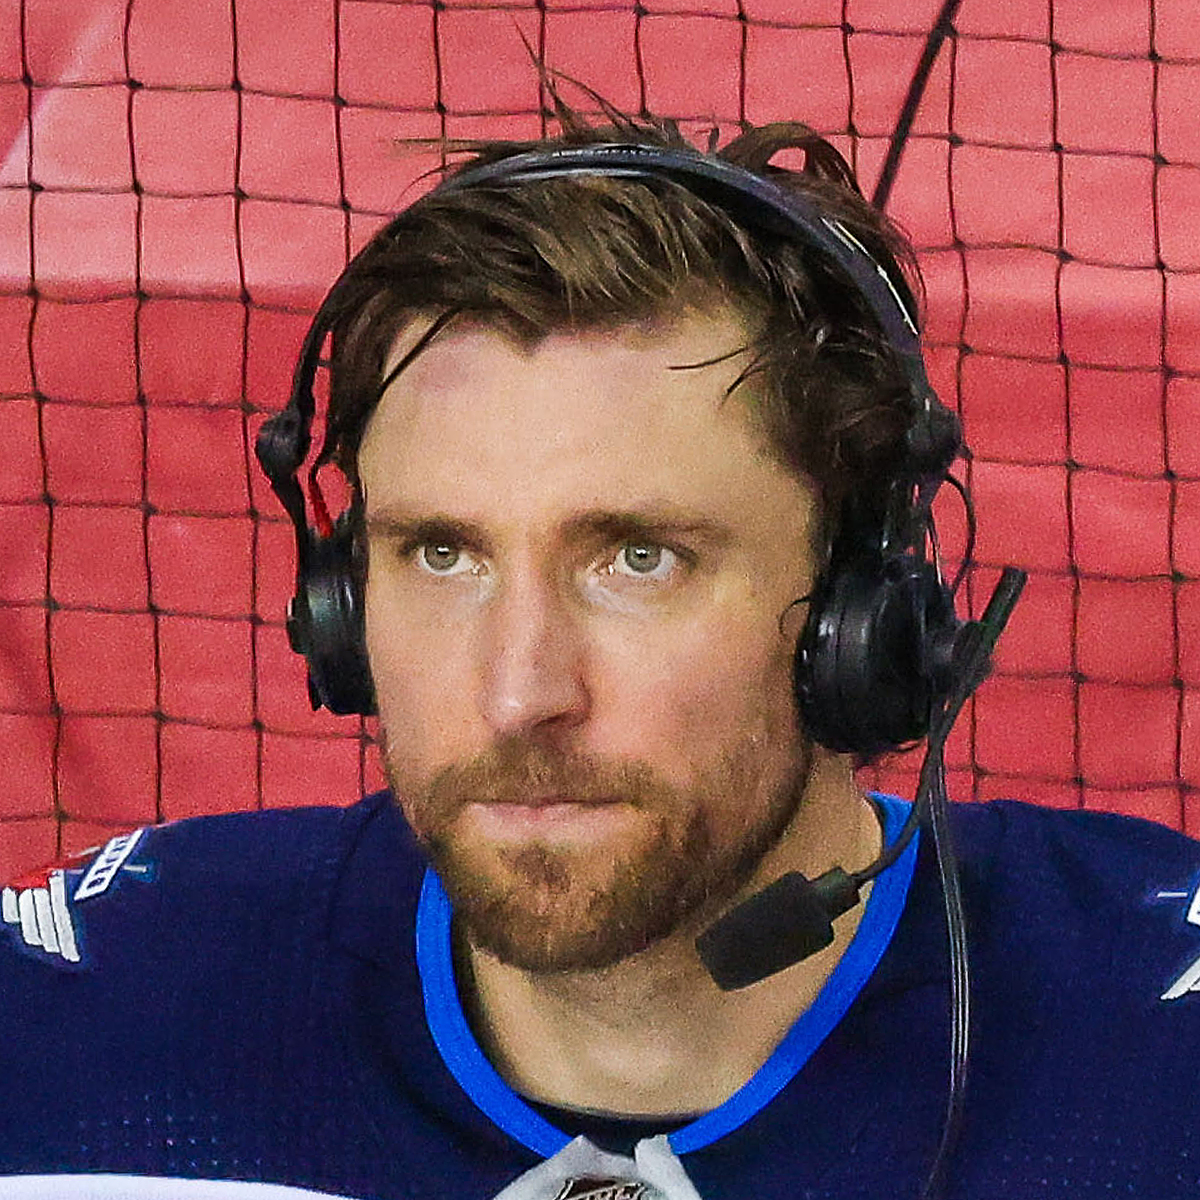 Jets' Blake Wheeler ponders legacy with future uncertain